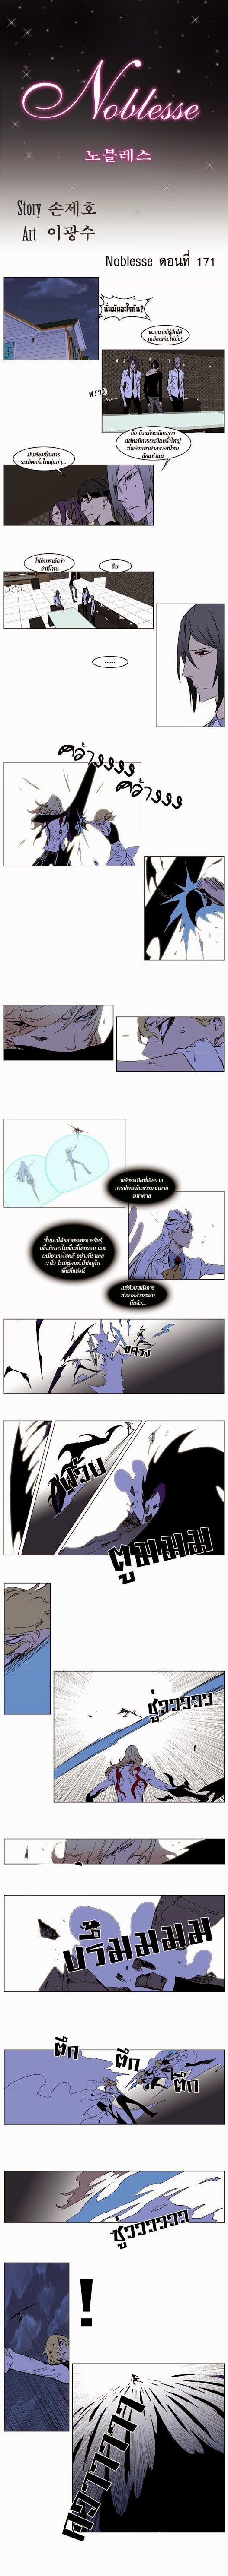 Noblesse 171 003